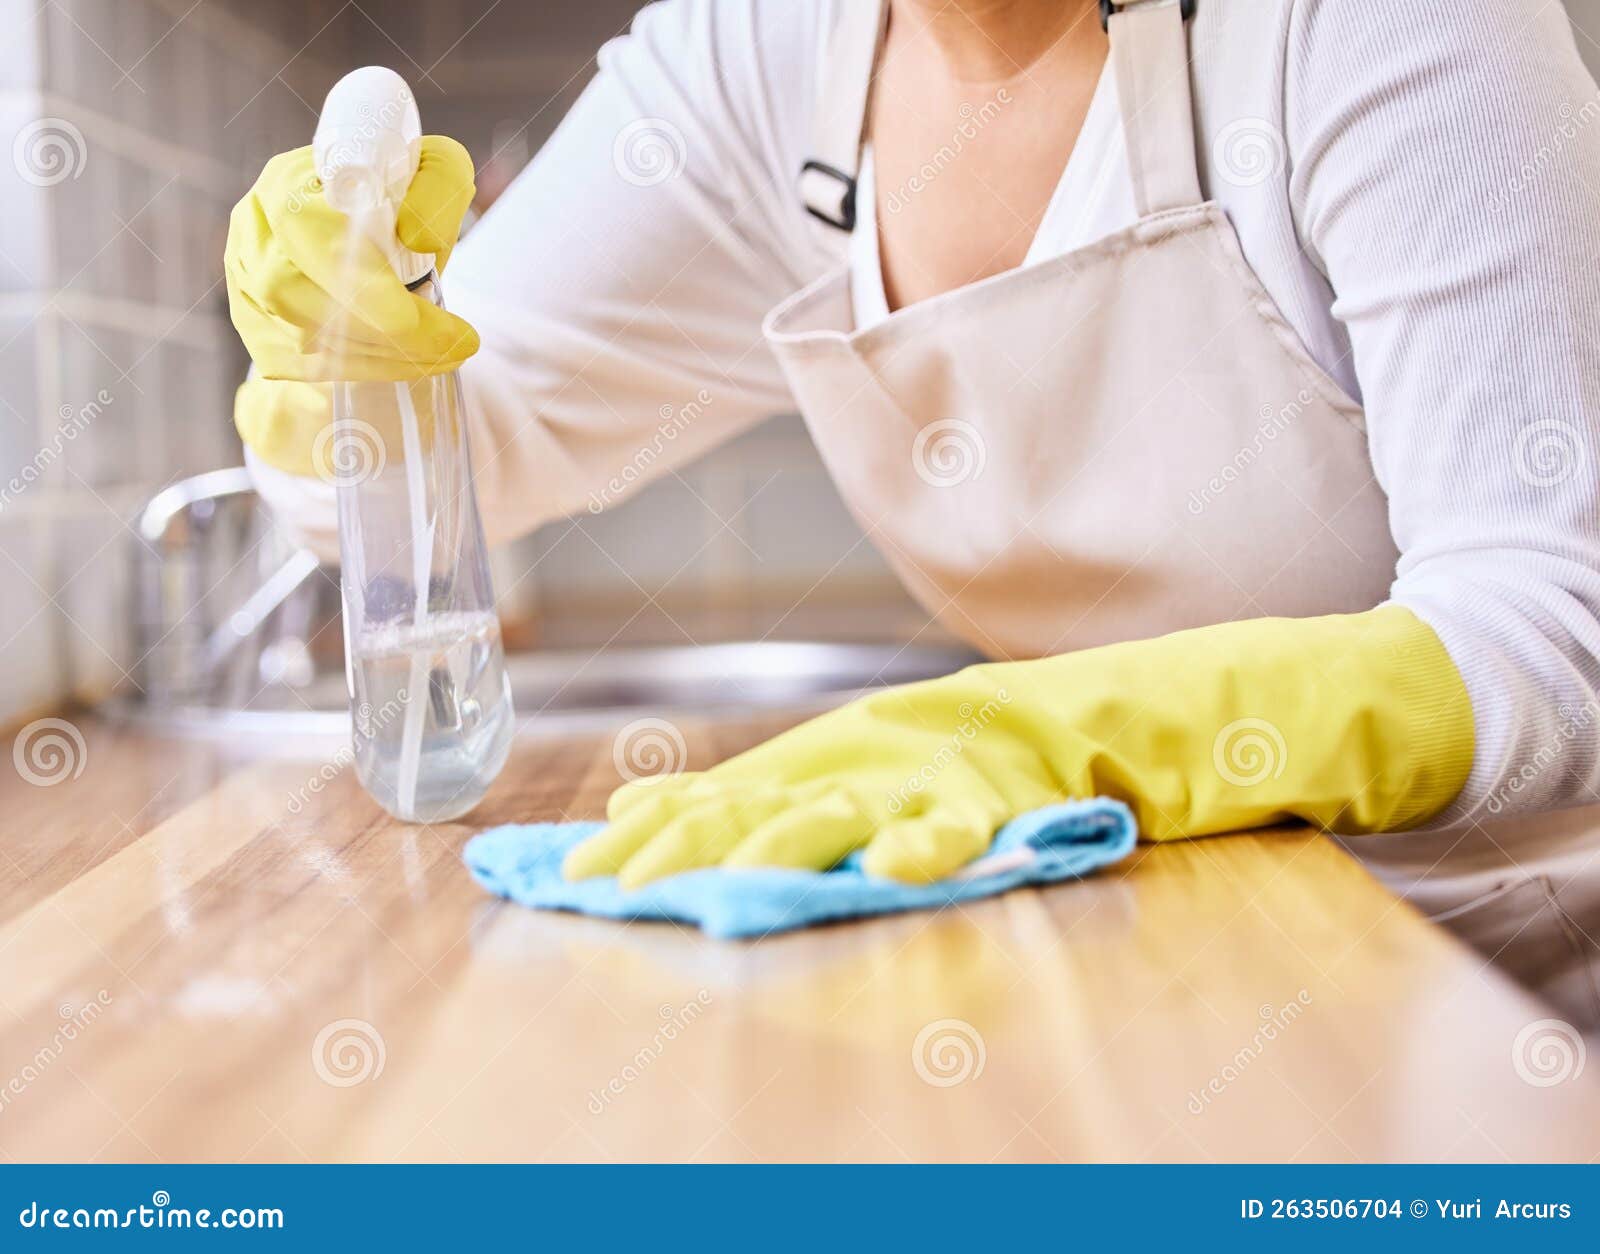 https://thumbs.dreamstime.com/z/hand-unrecognizable-cleaner-spraying-wiping-table-surface-cloth-cleaning-alone-home-one-woman-counter-263506704.jpg